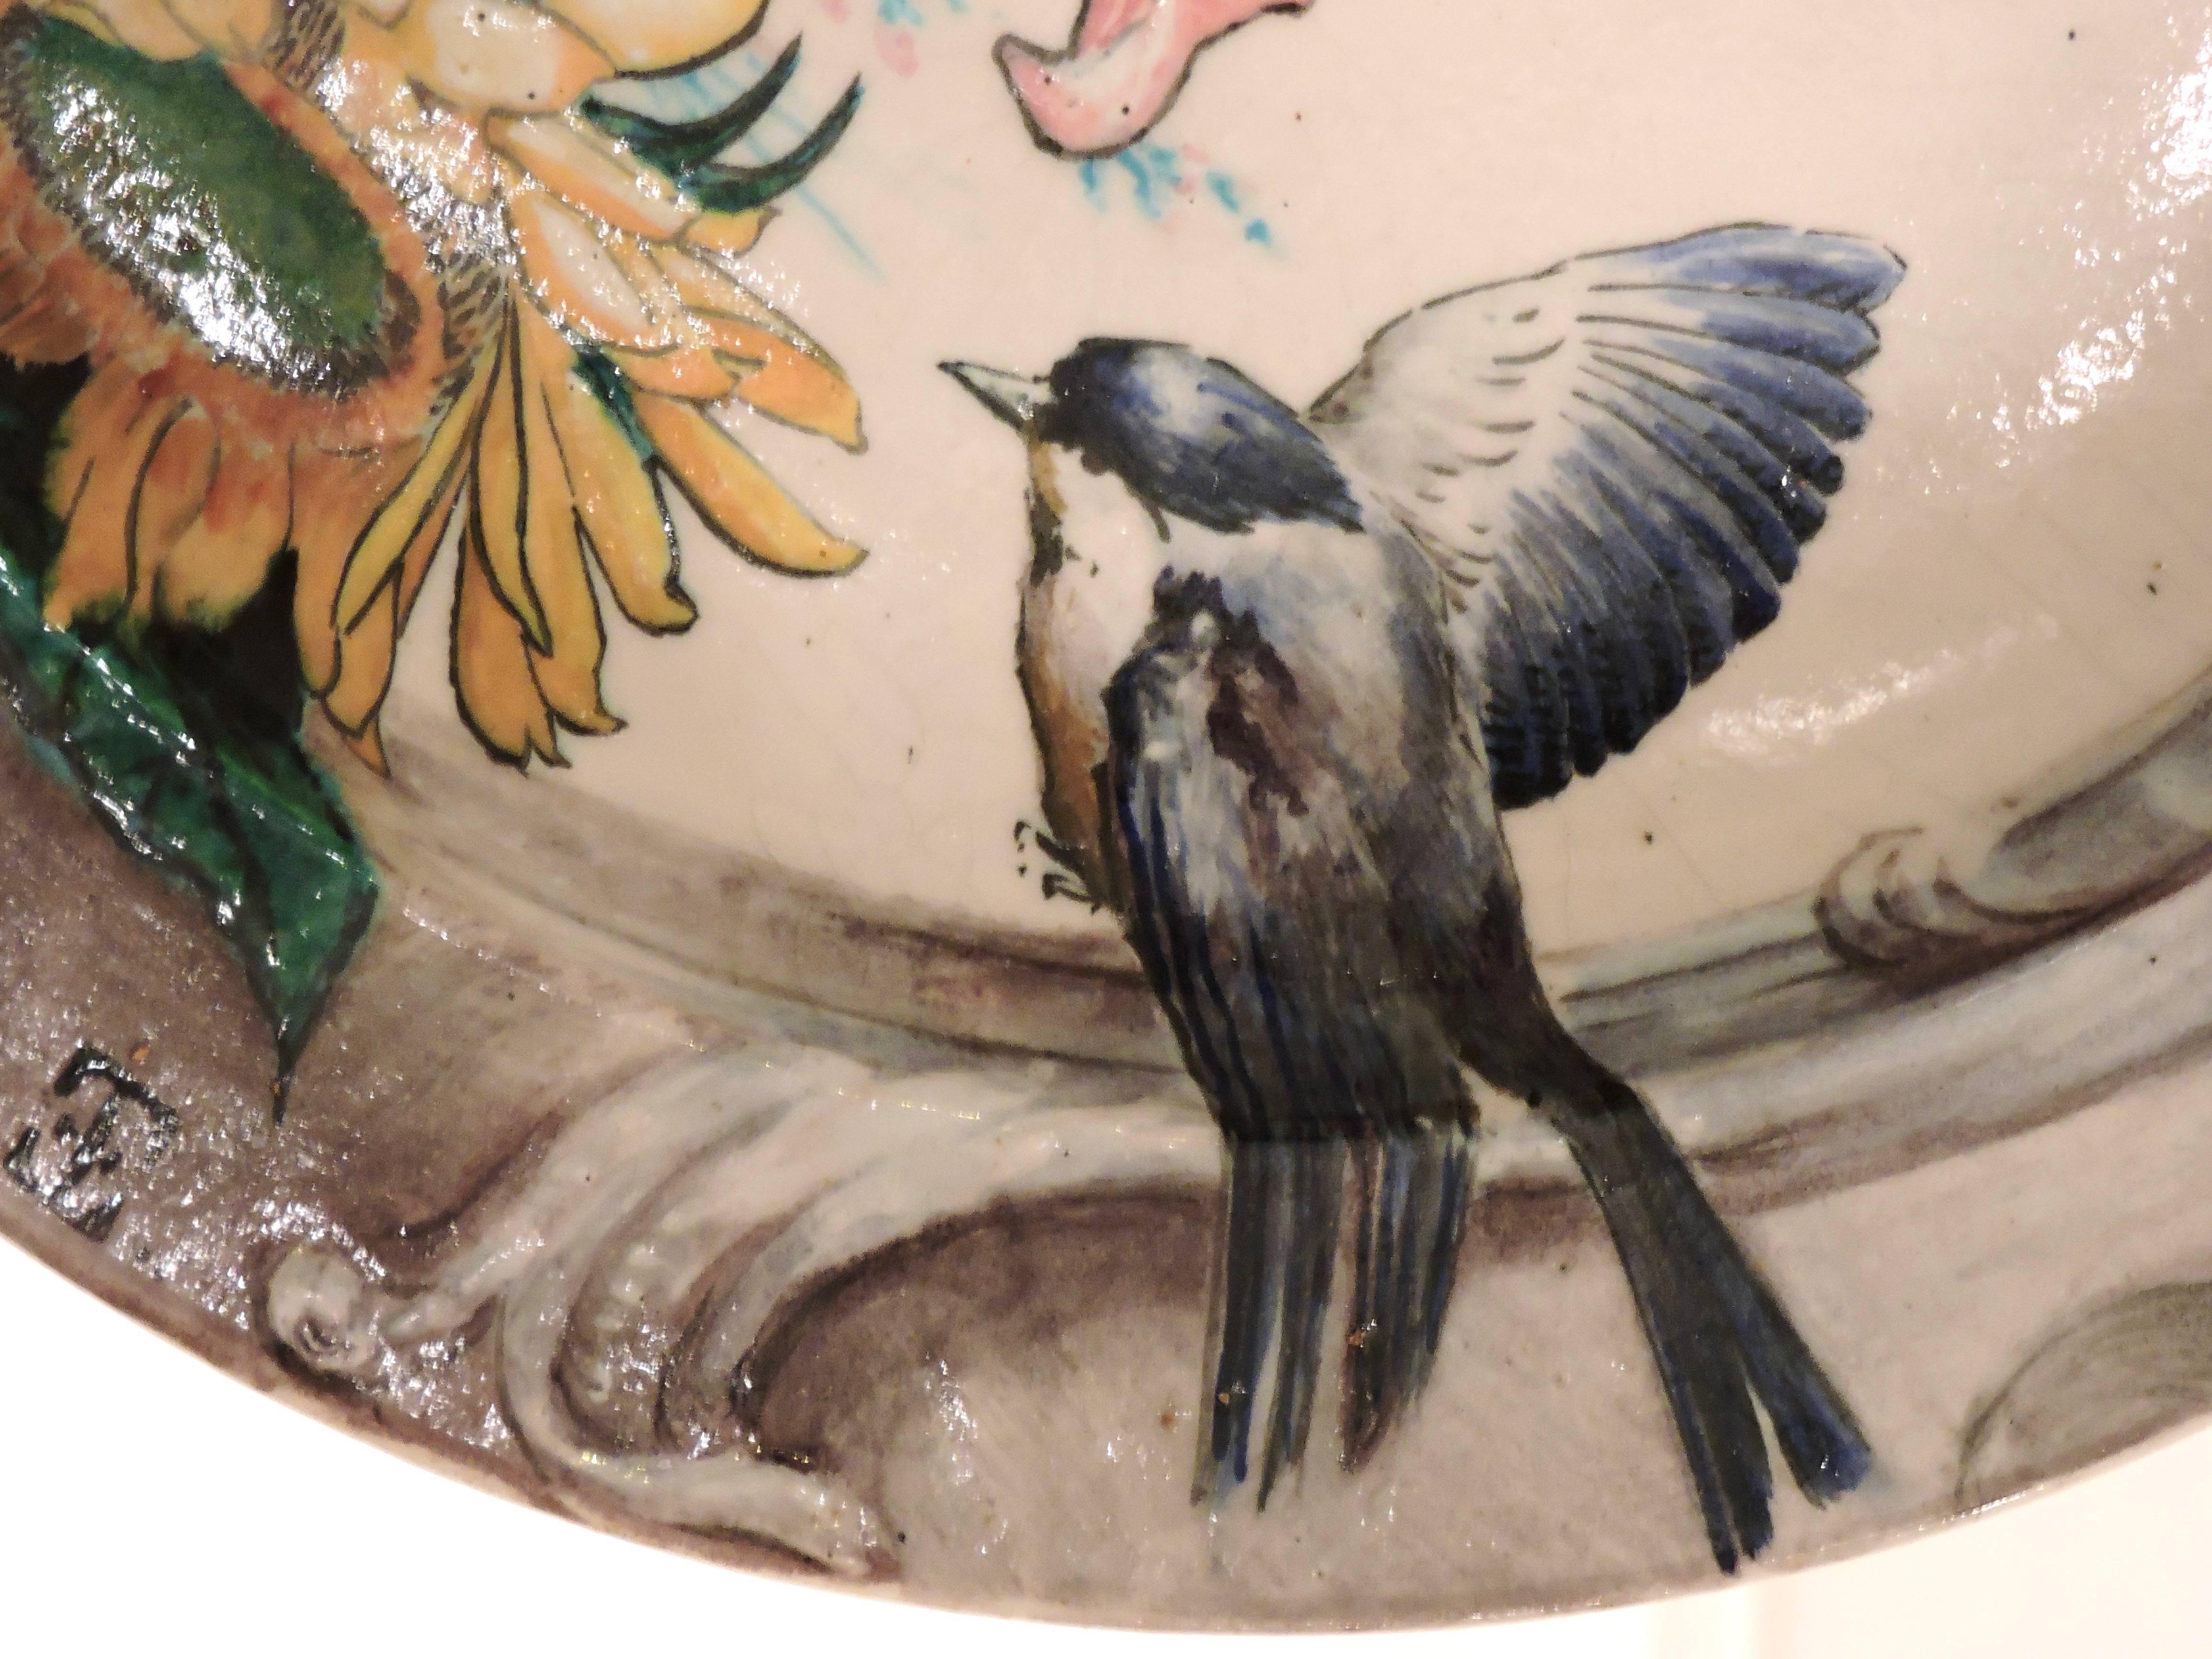 Enameled Theodore Deck Polychrome Faience Charger, circa 1880